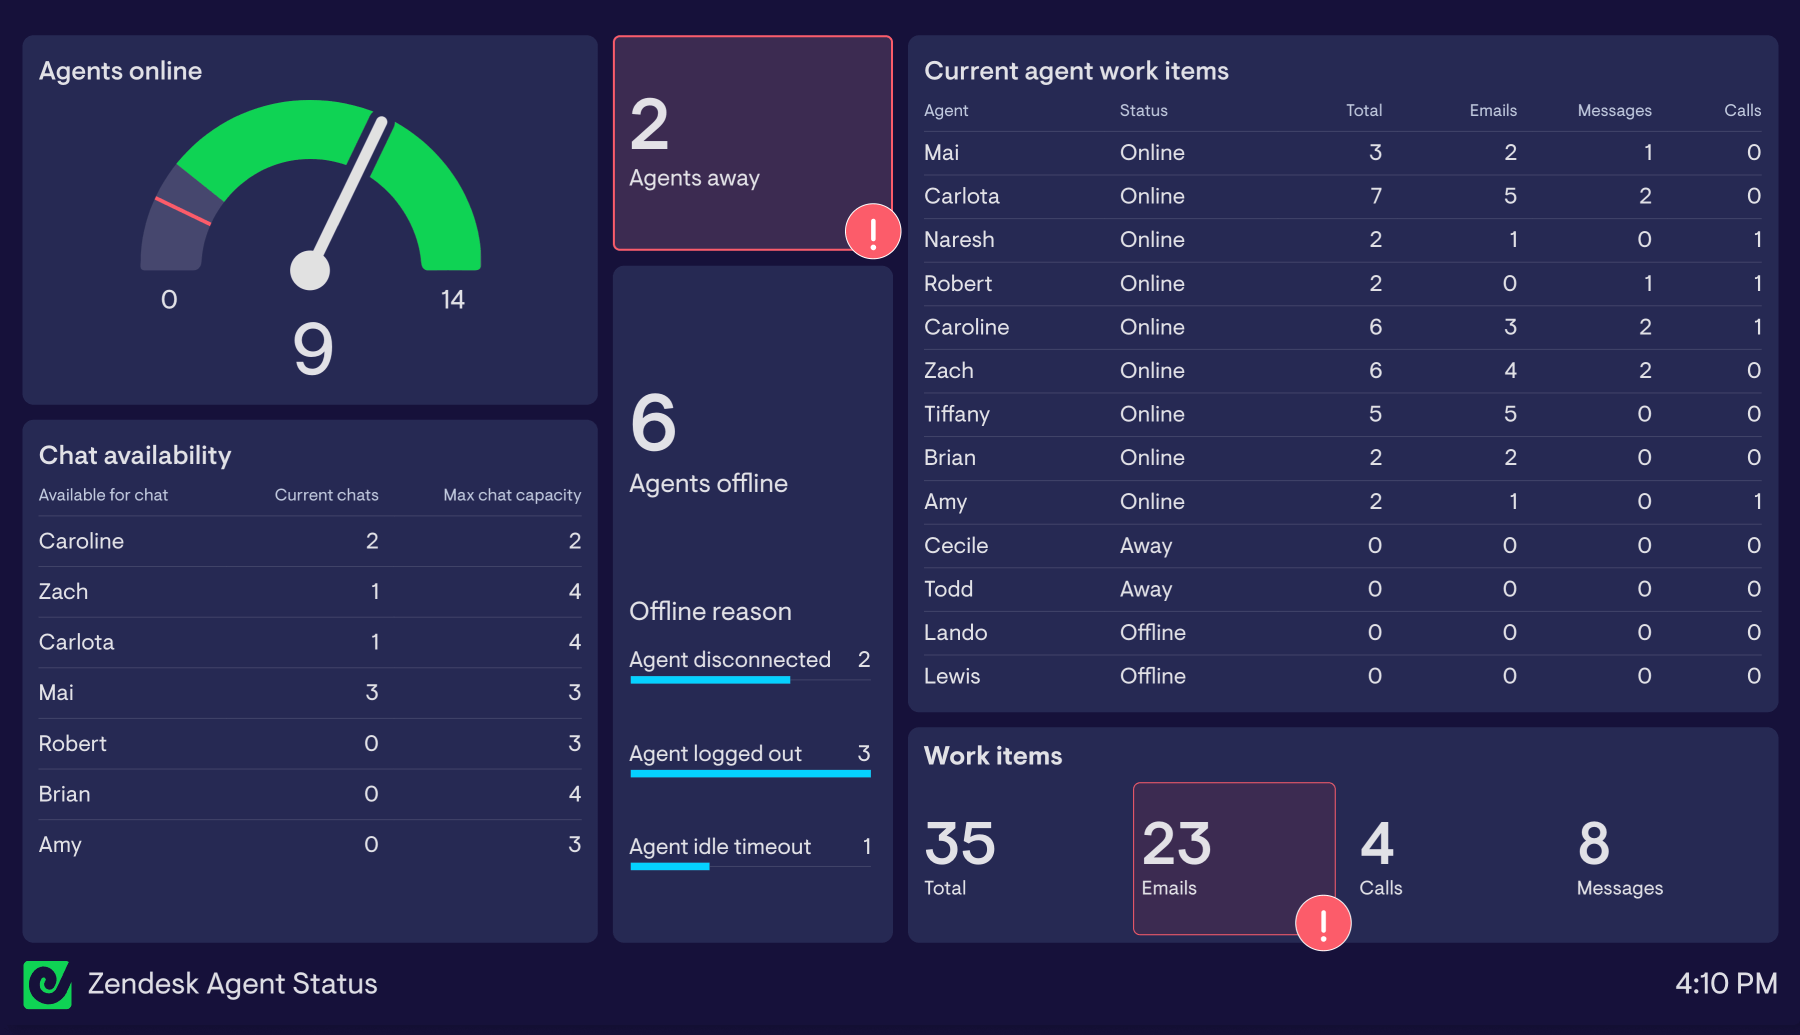 Example of a dashboard used to monitor agent status metrics in real-time.